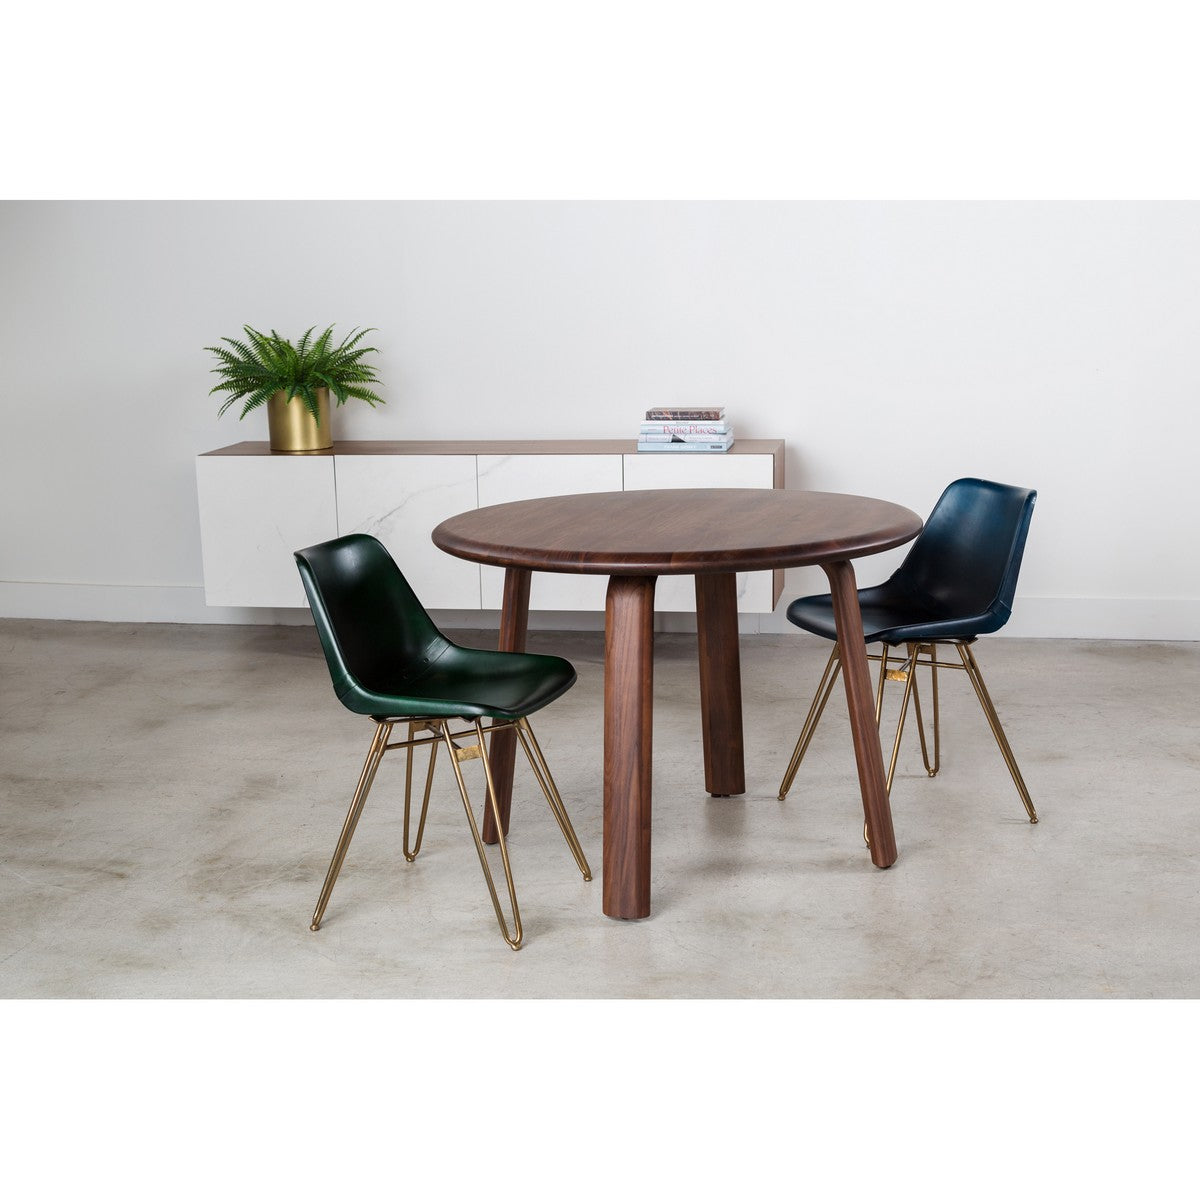 Moe's Home Collection Malibu Round Dining Table Walnut - BC-1047-03 - Moe's Home Collection - Dining Tables - Minimal And Modern - 1